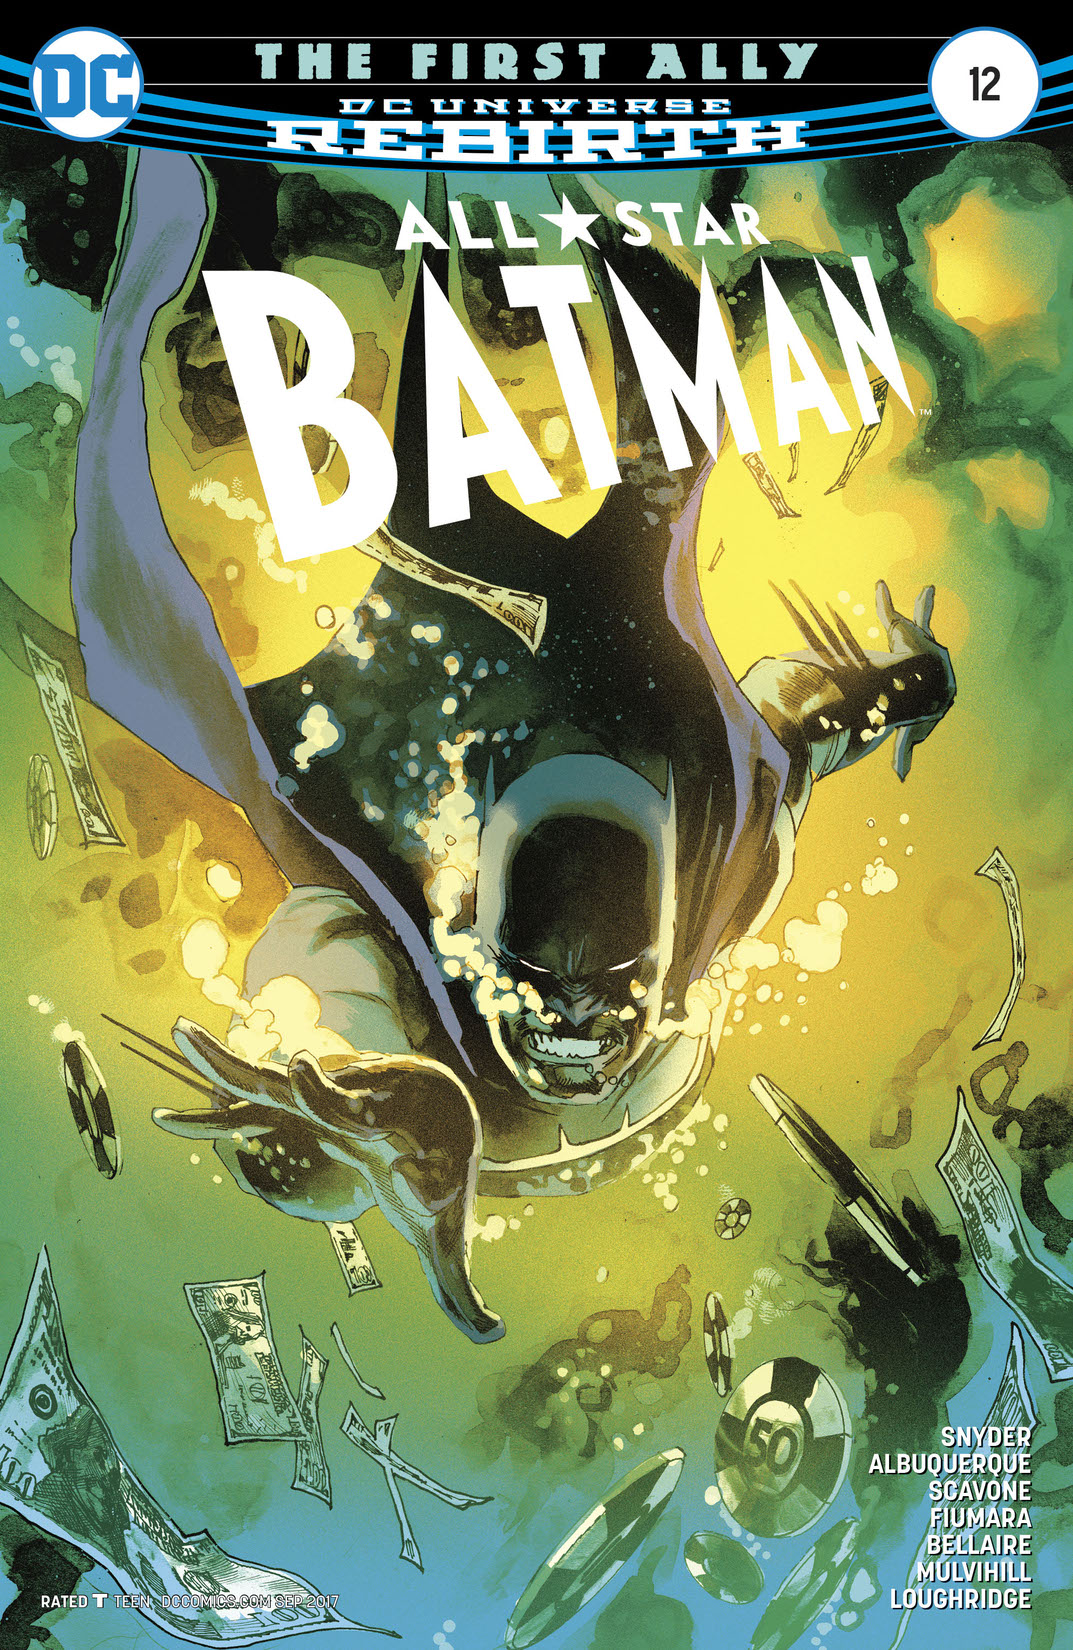 All Star Batman #12 preview images